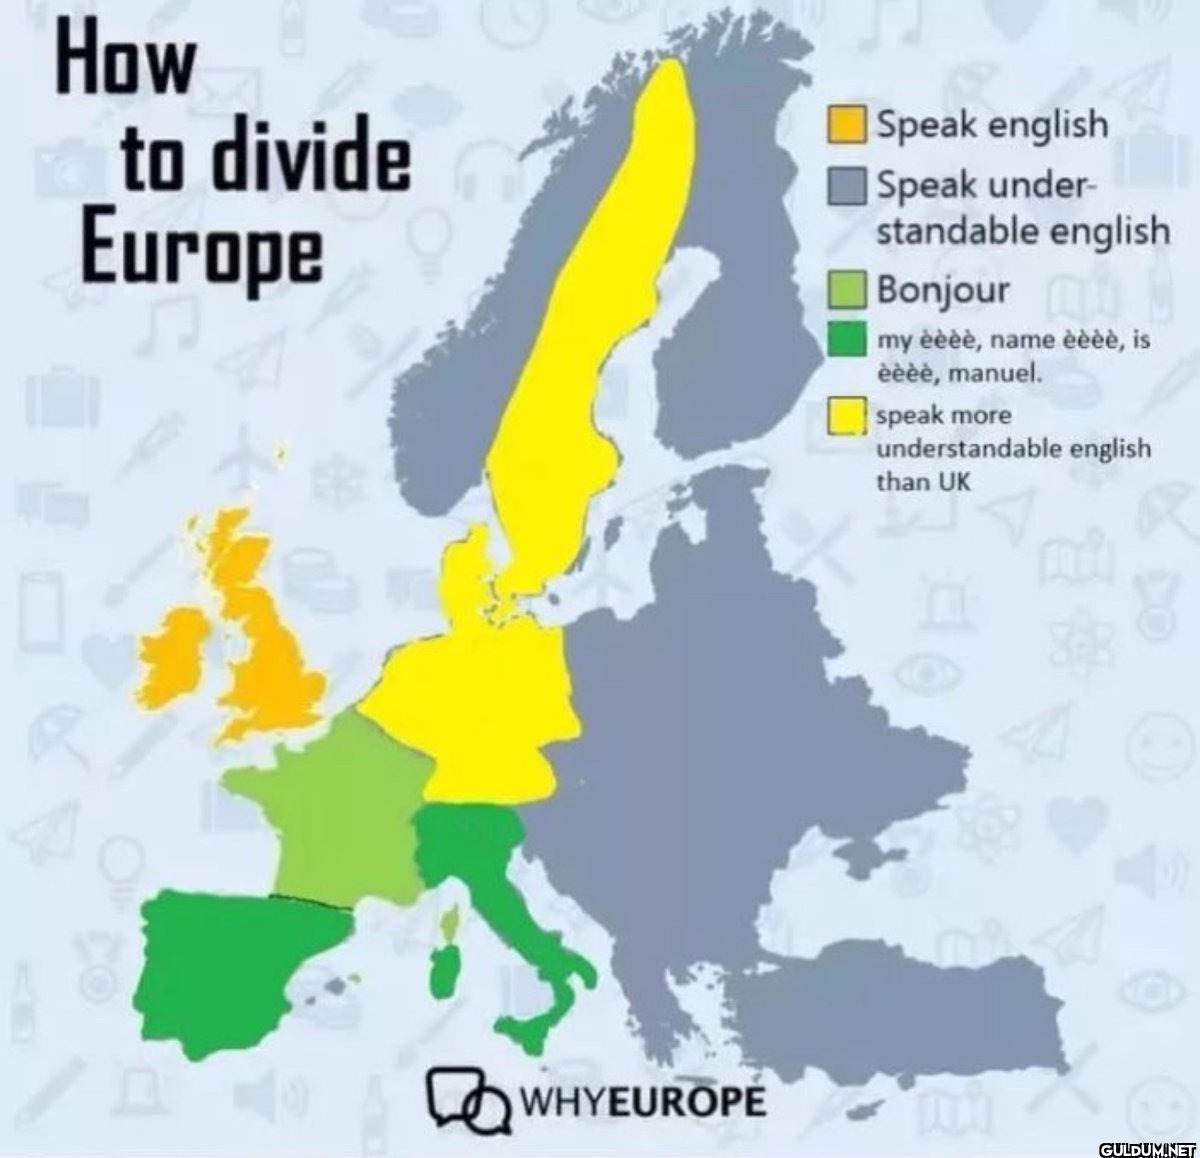 How to divide Europe...